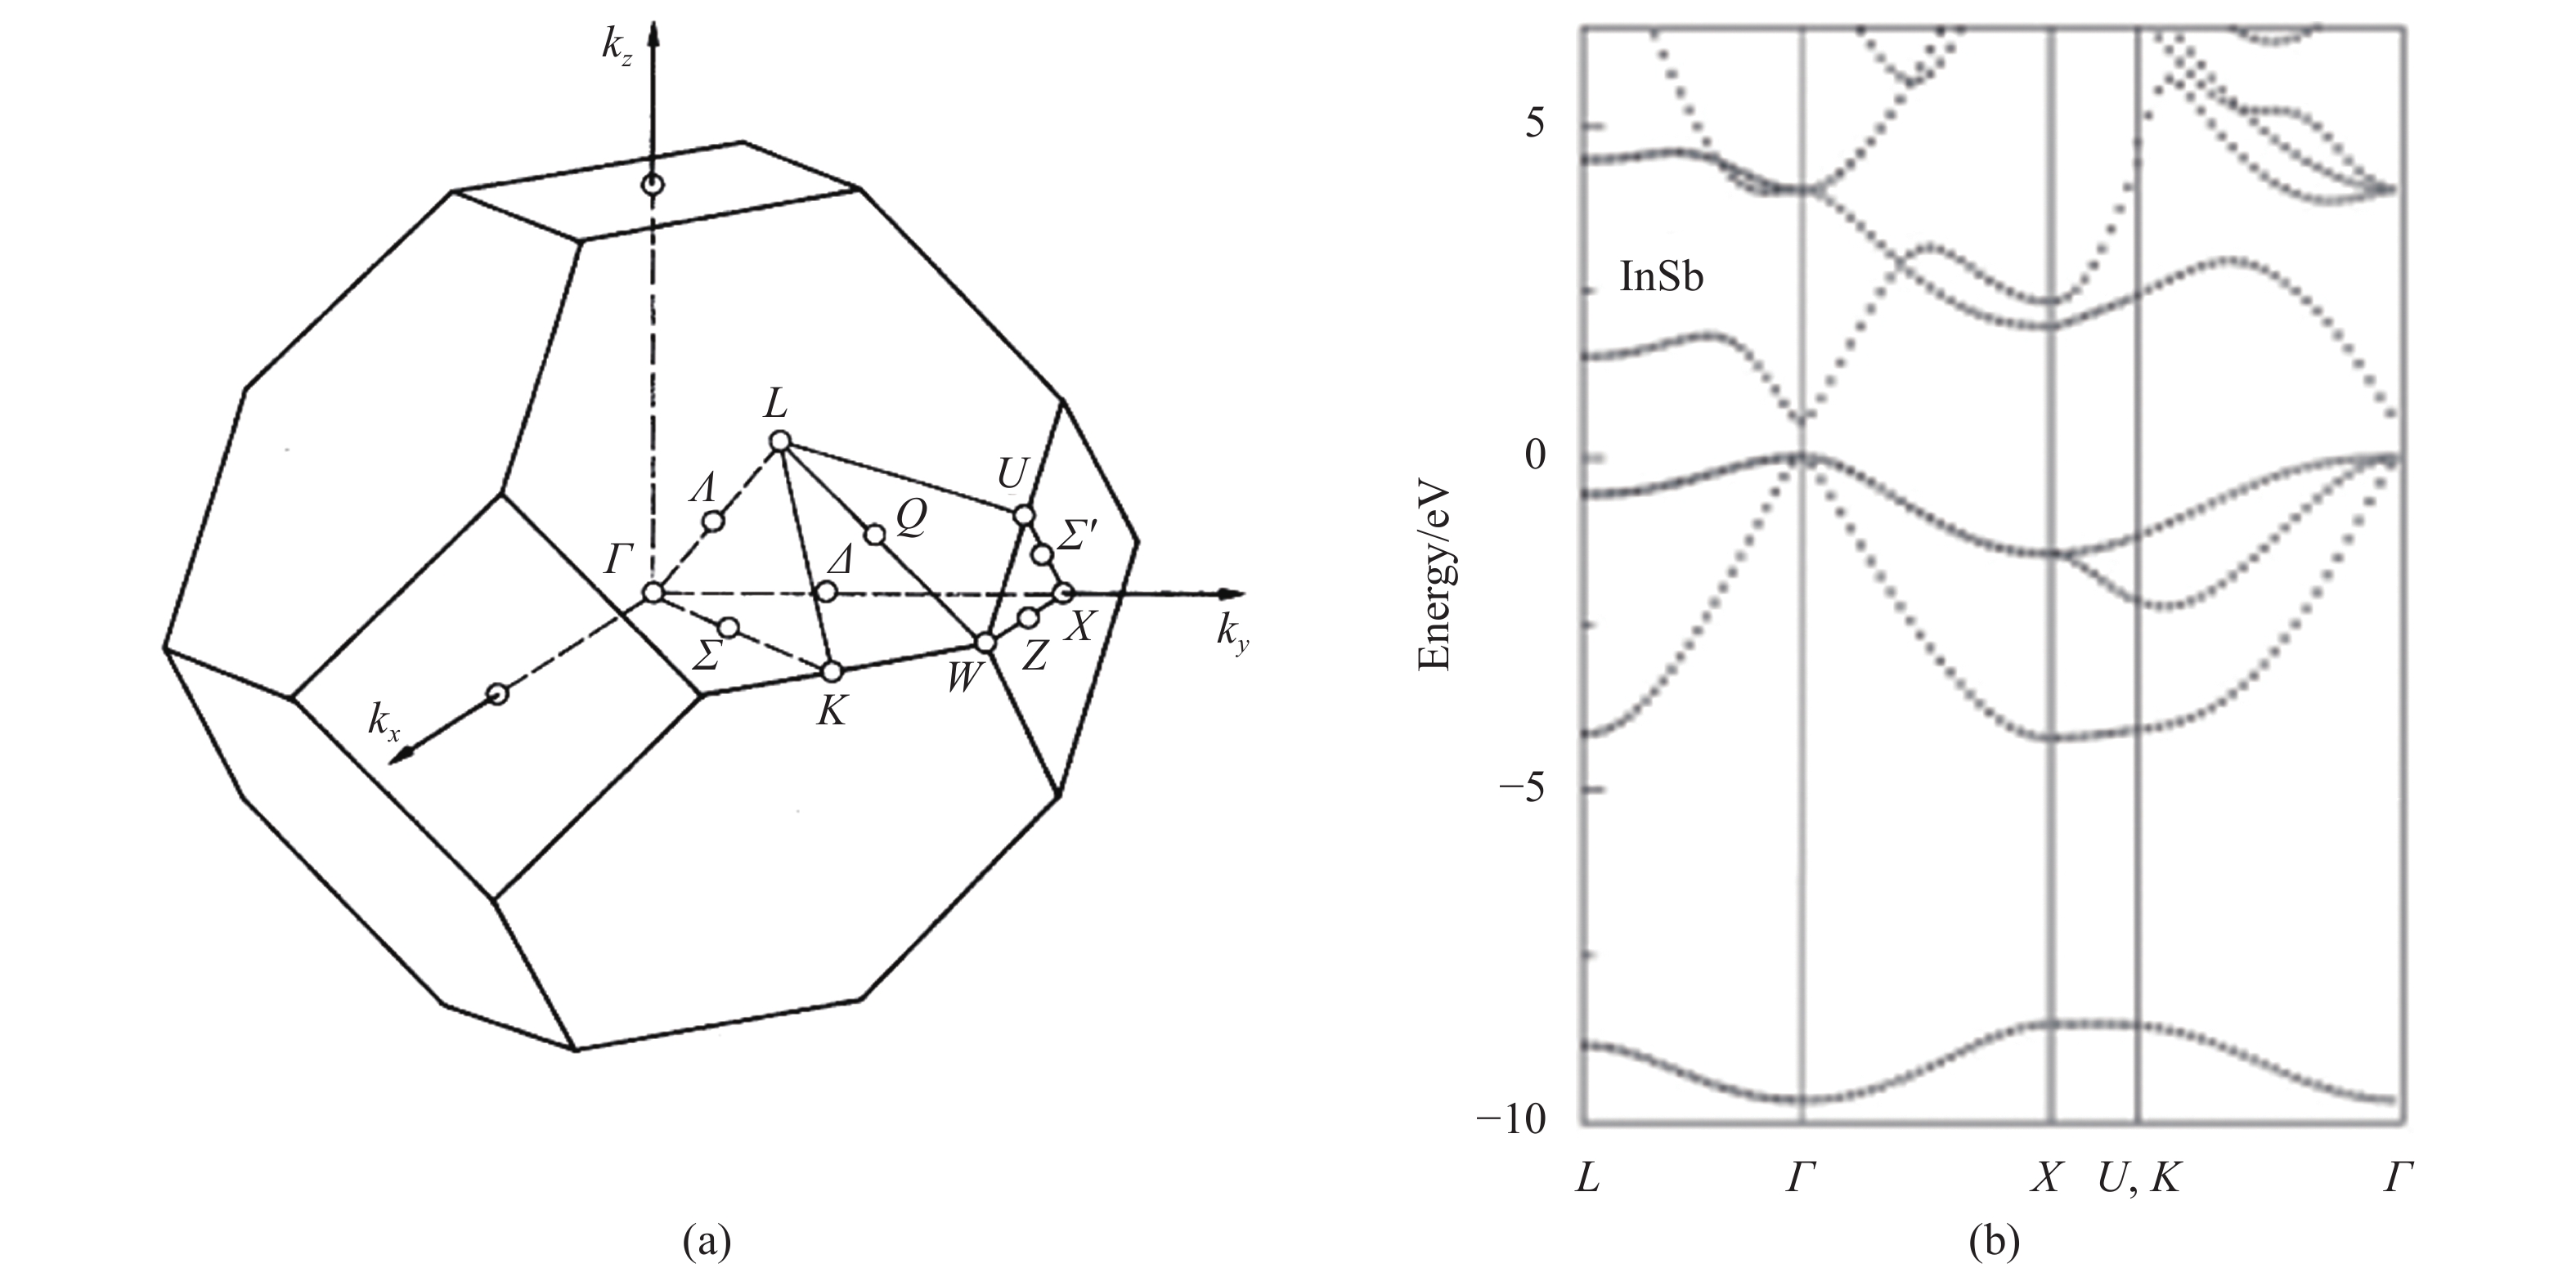 Brillouin zone (a) and band structure (b) of InSb crystal (calculated by empirical pseudopotential method without spin-orbit coupling)